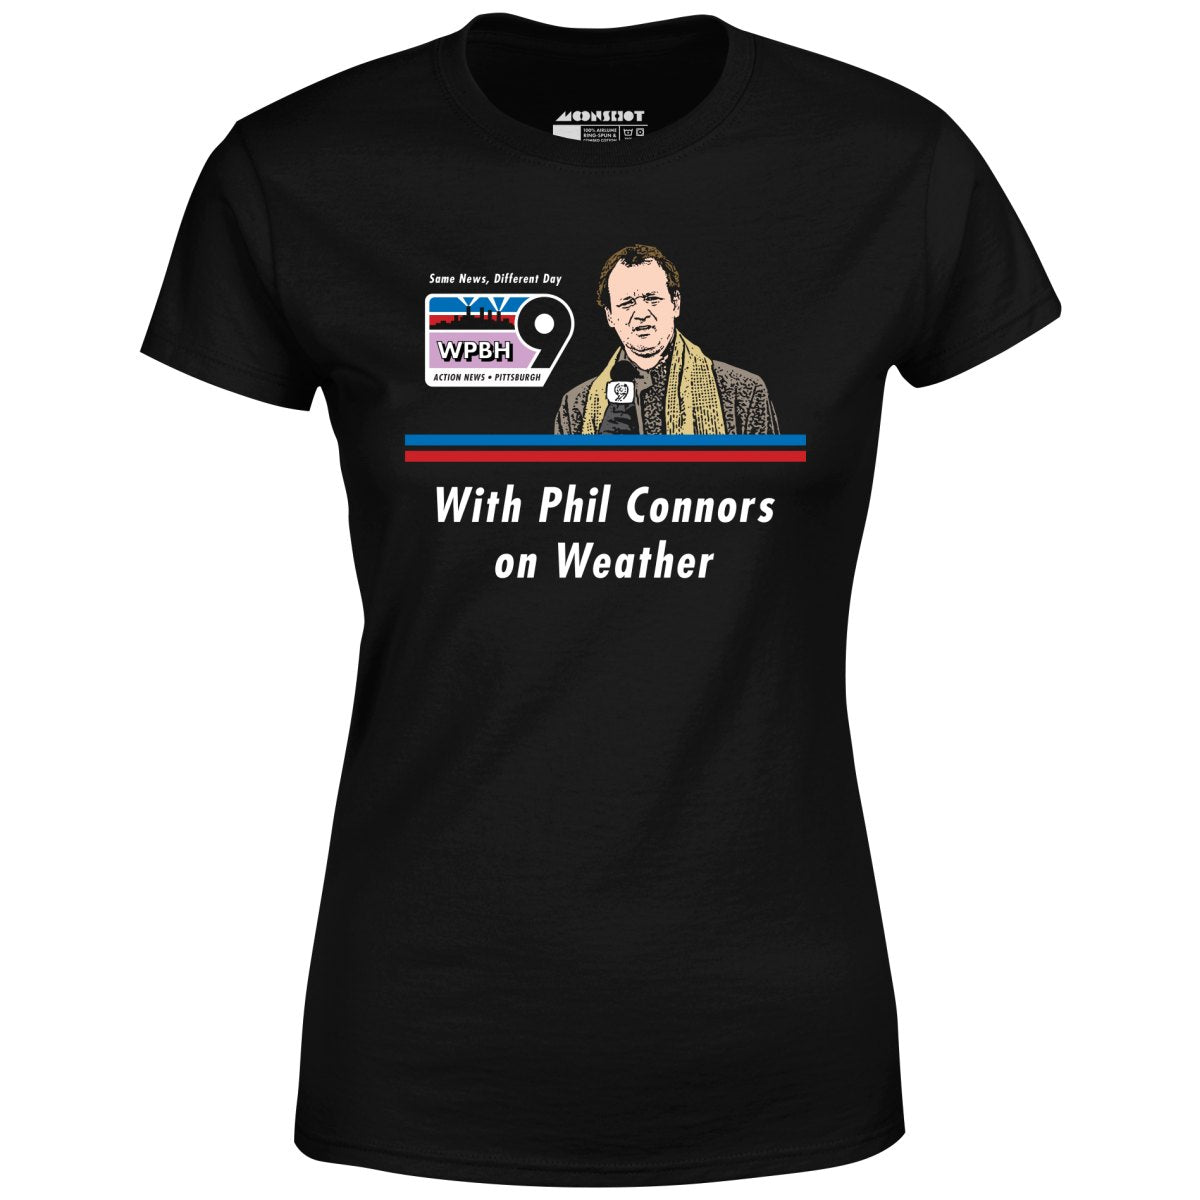 WPBH News with Phil Connors - Groundhog Day - Women's T-Shirt